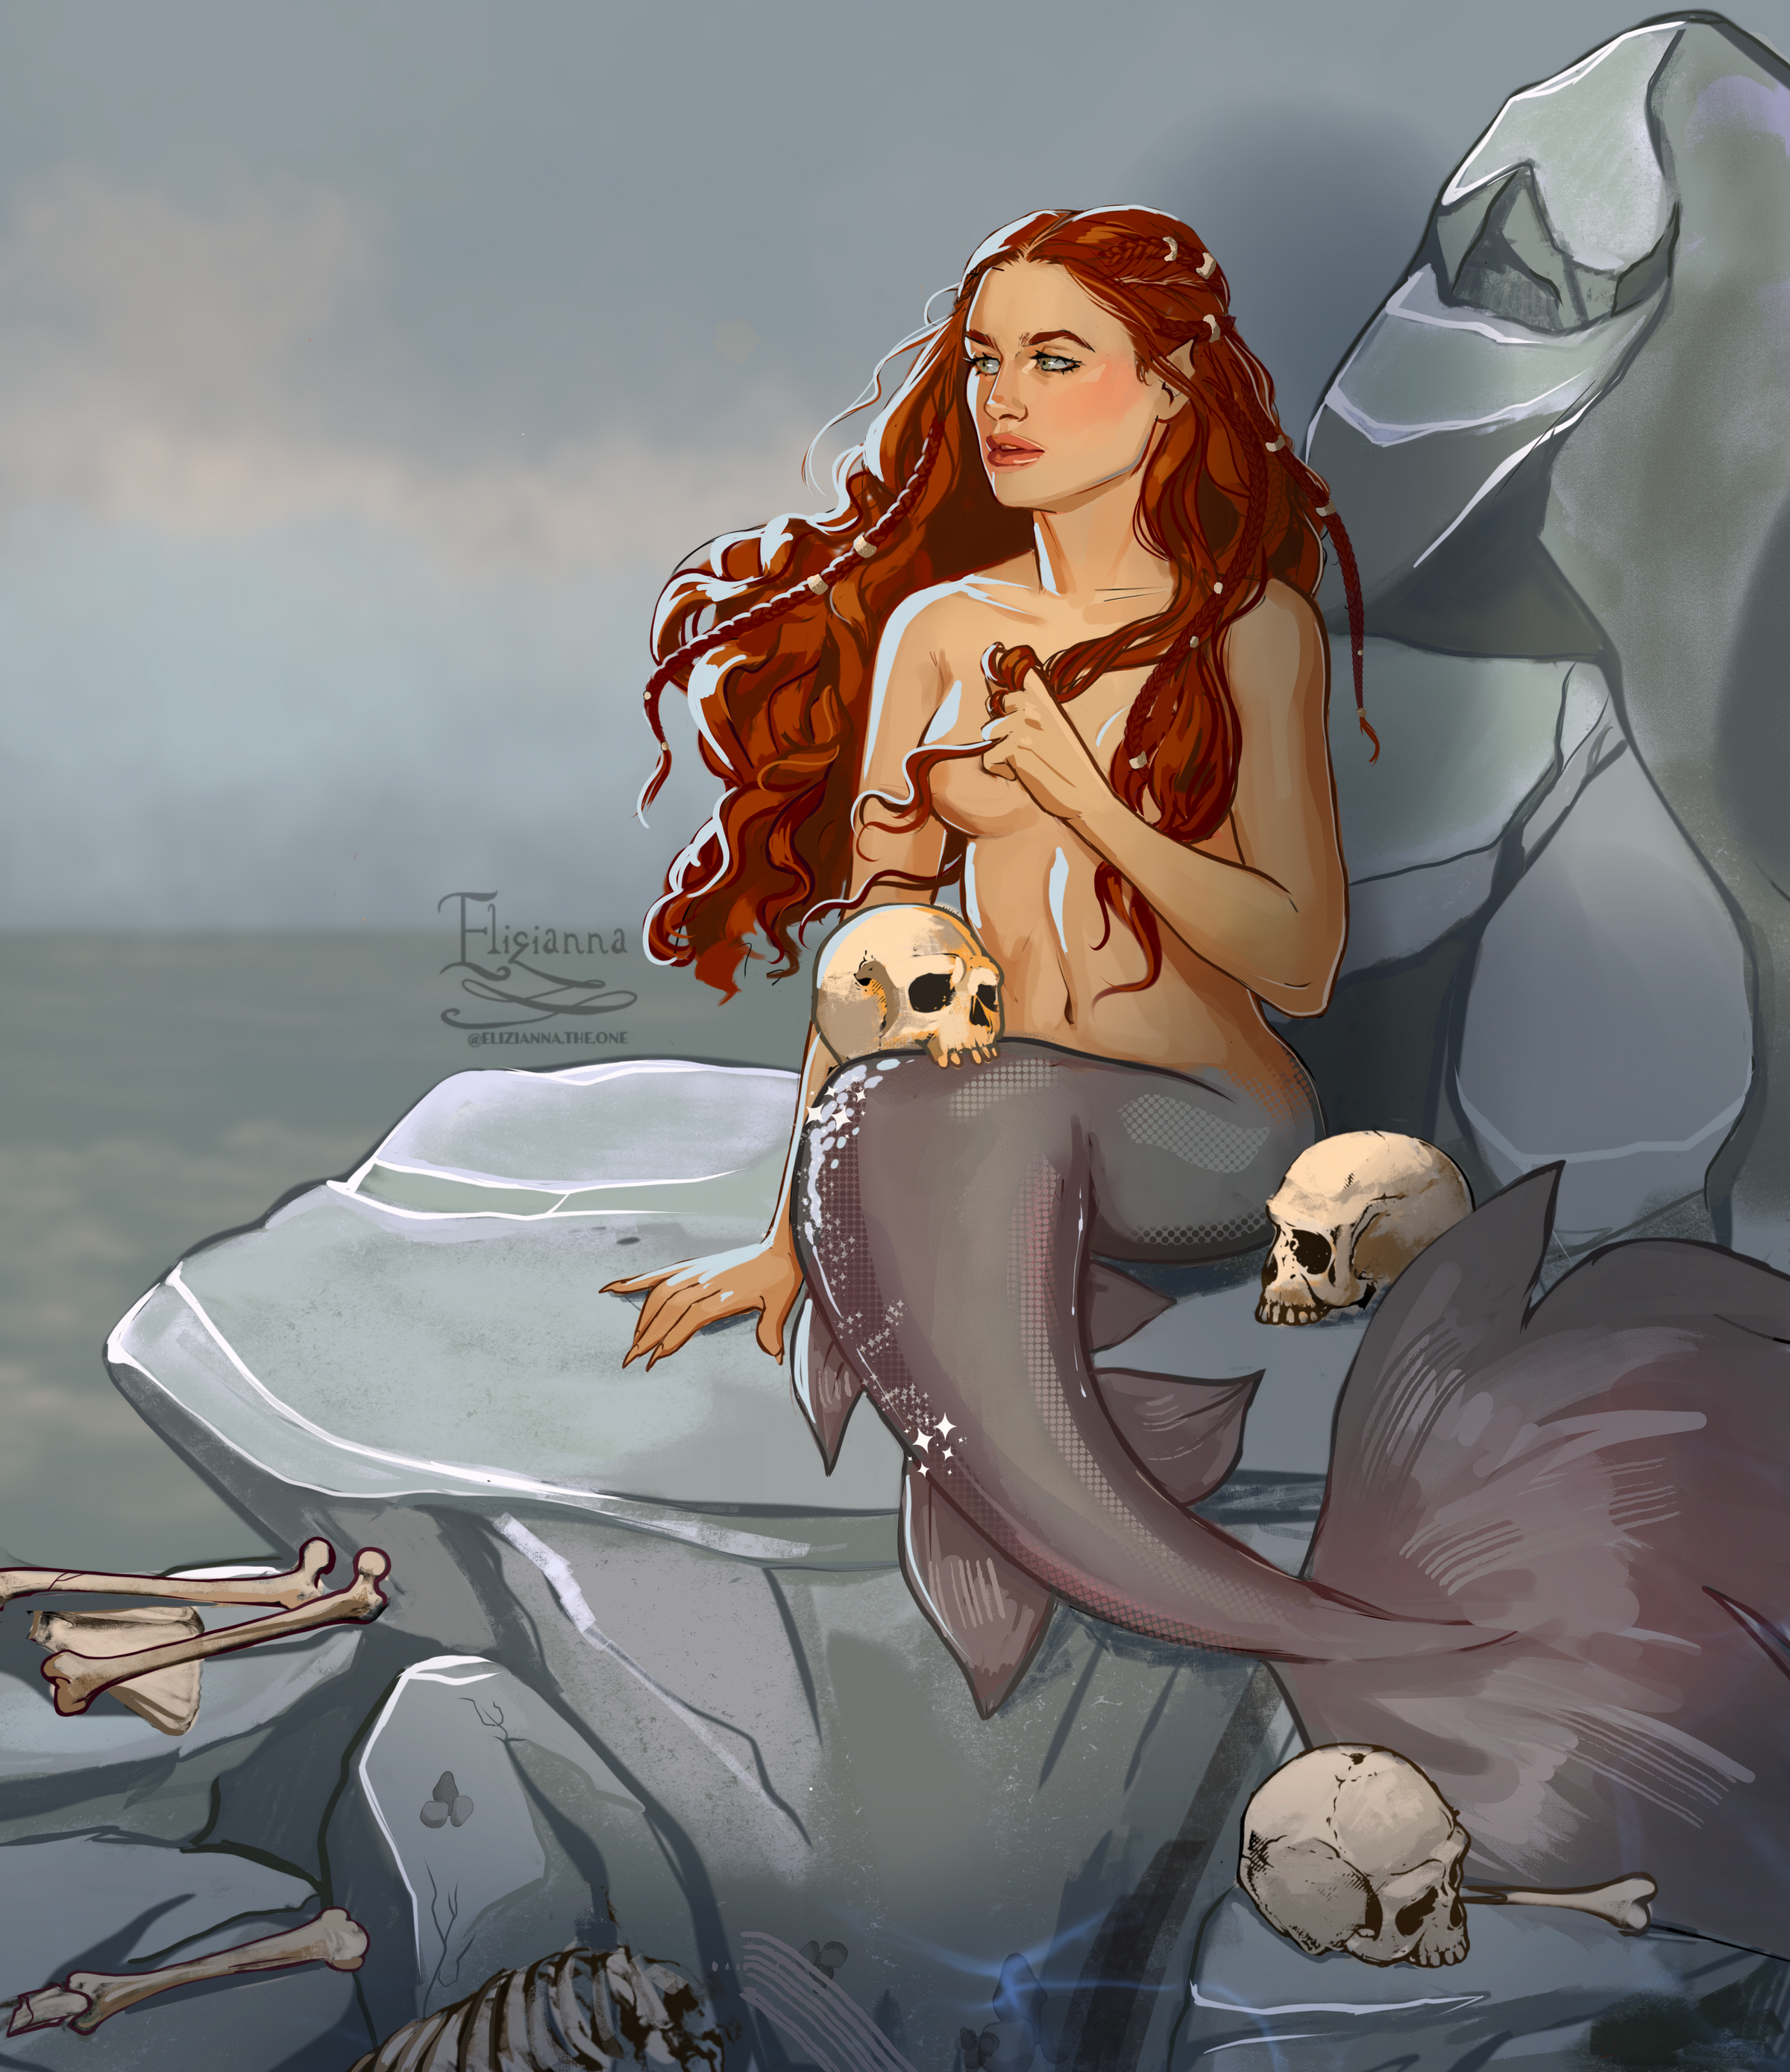 Artwork showing a mermaid sitting out of the water on rocks. She has long wavy red hair and has sections of it in braids and pulled back from her face with bone beads. She is holding a skull in her lap and is surrounded by several other skulls and bones. Art is by @elizianna.the.one on Instagram and artwork is from The Syren's Mutiny by Jessica S. Taylor..